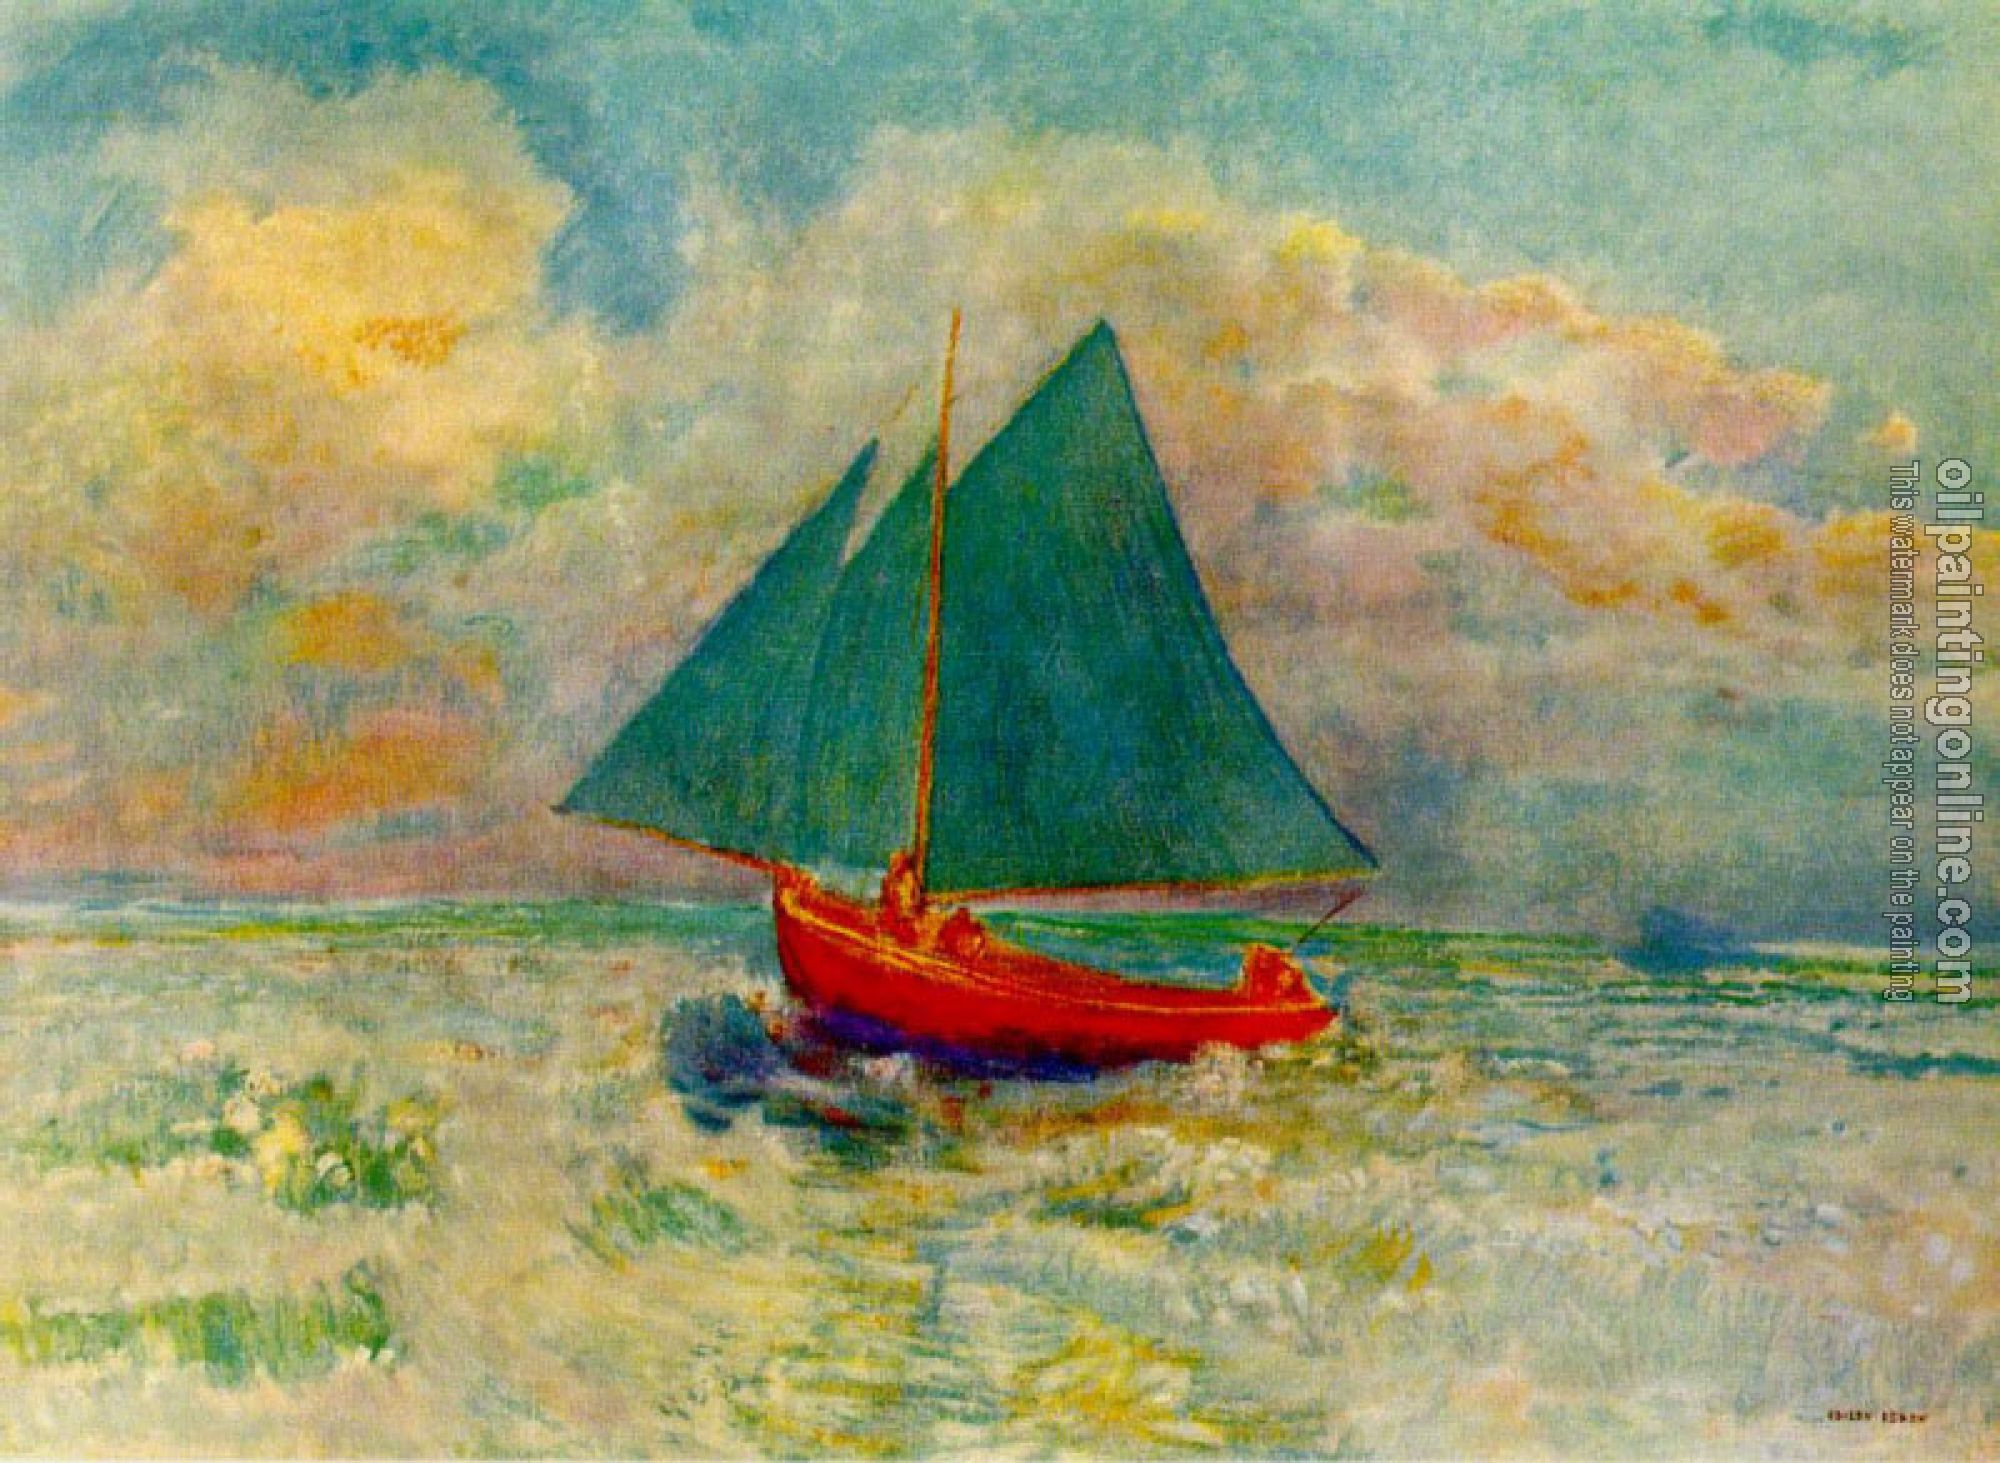 Redon, Odilon - Red Boat with a Blue Sail